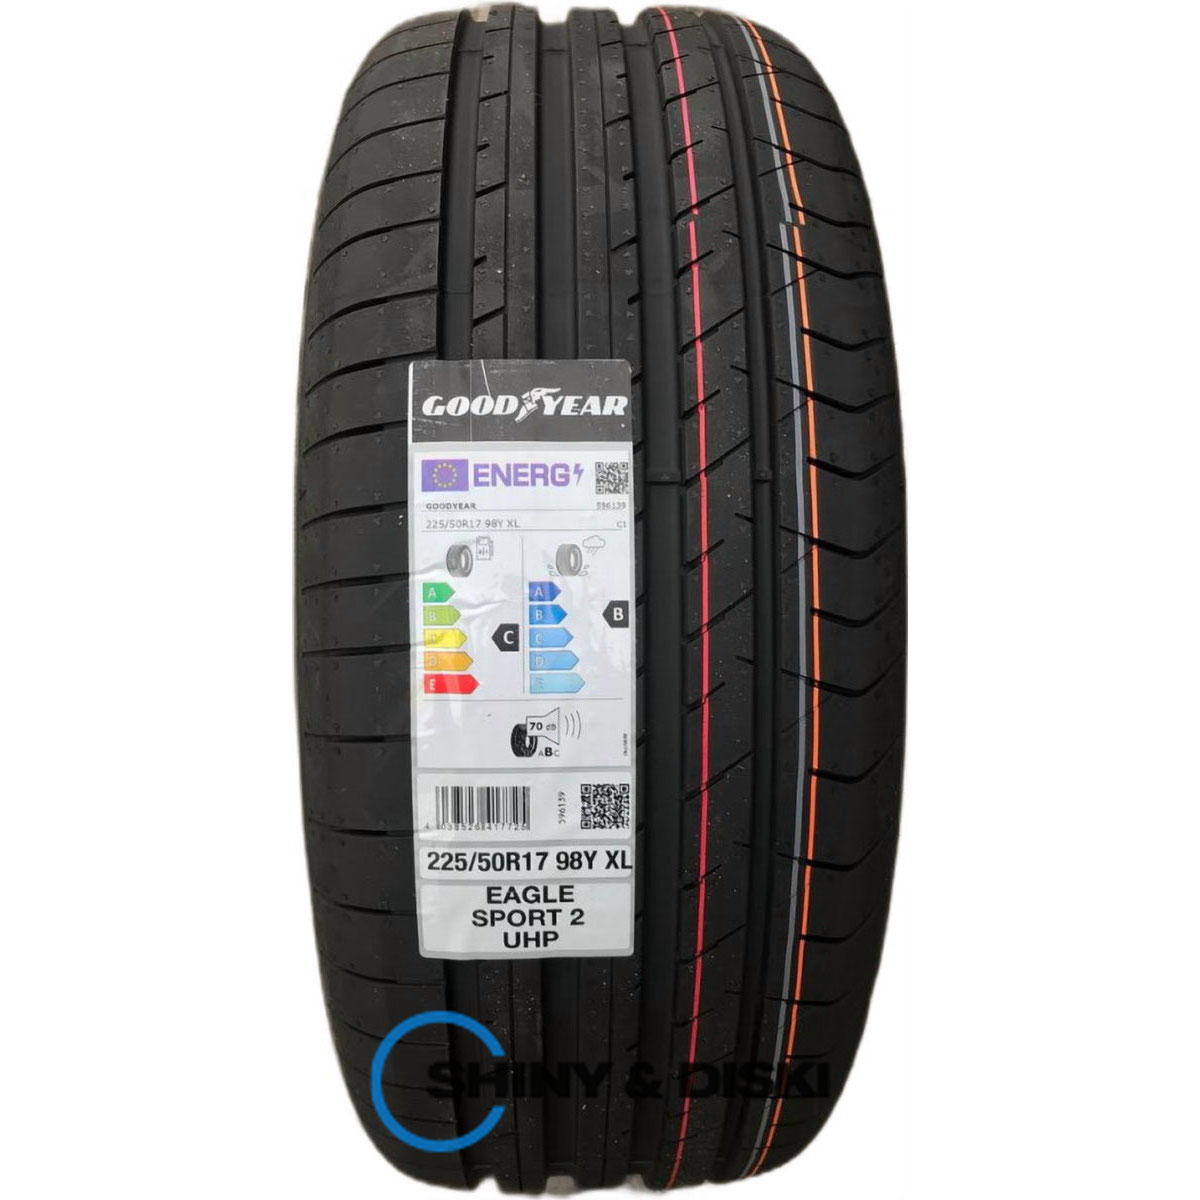 покришки goodyear eagle sport 2 uhp 245/45 r19 102y xl fp